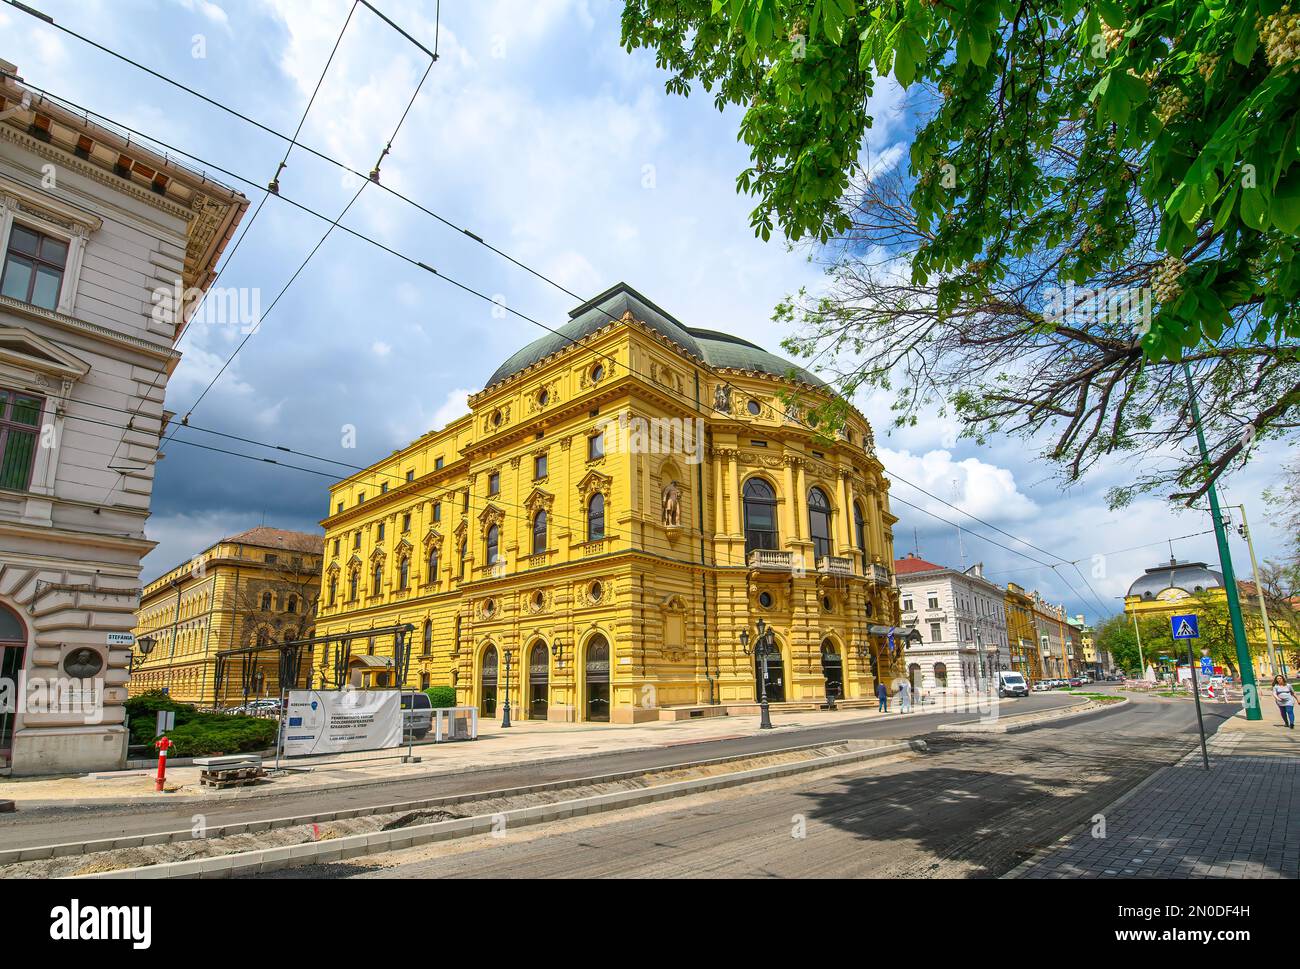 Szeged, Hungary. The National Theatre of Szeged is the main theatre of Szeged, Hungary. It was built in 1883 in Eclectic and Neo-baroque style. Stock Photo